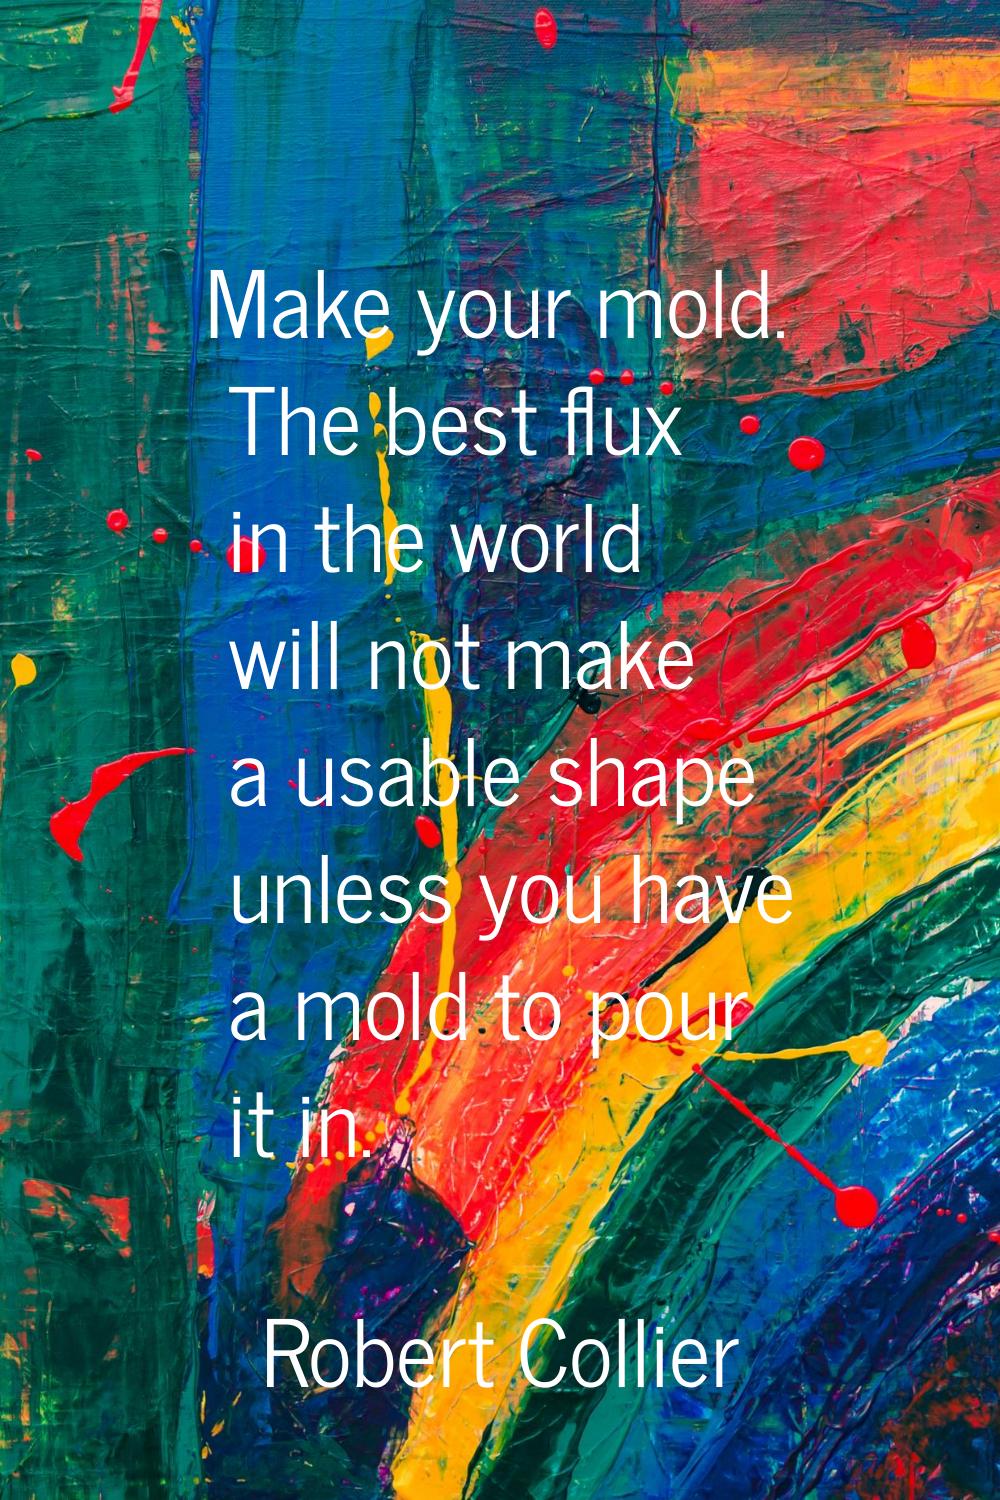 Make your mold. The best flux in the world will not make a usable shape unless you have a mold to p